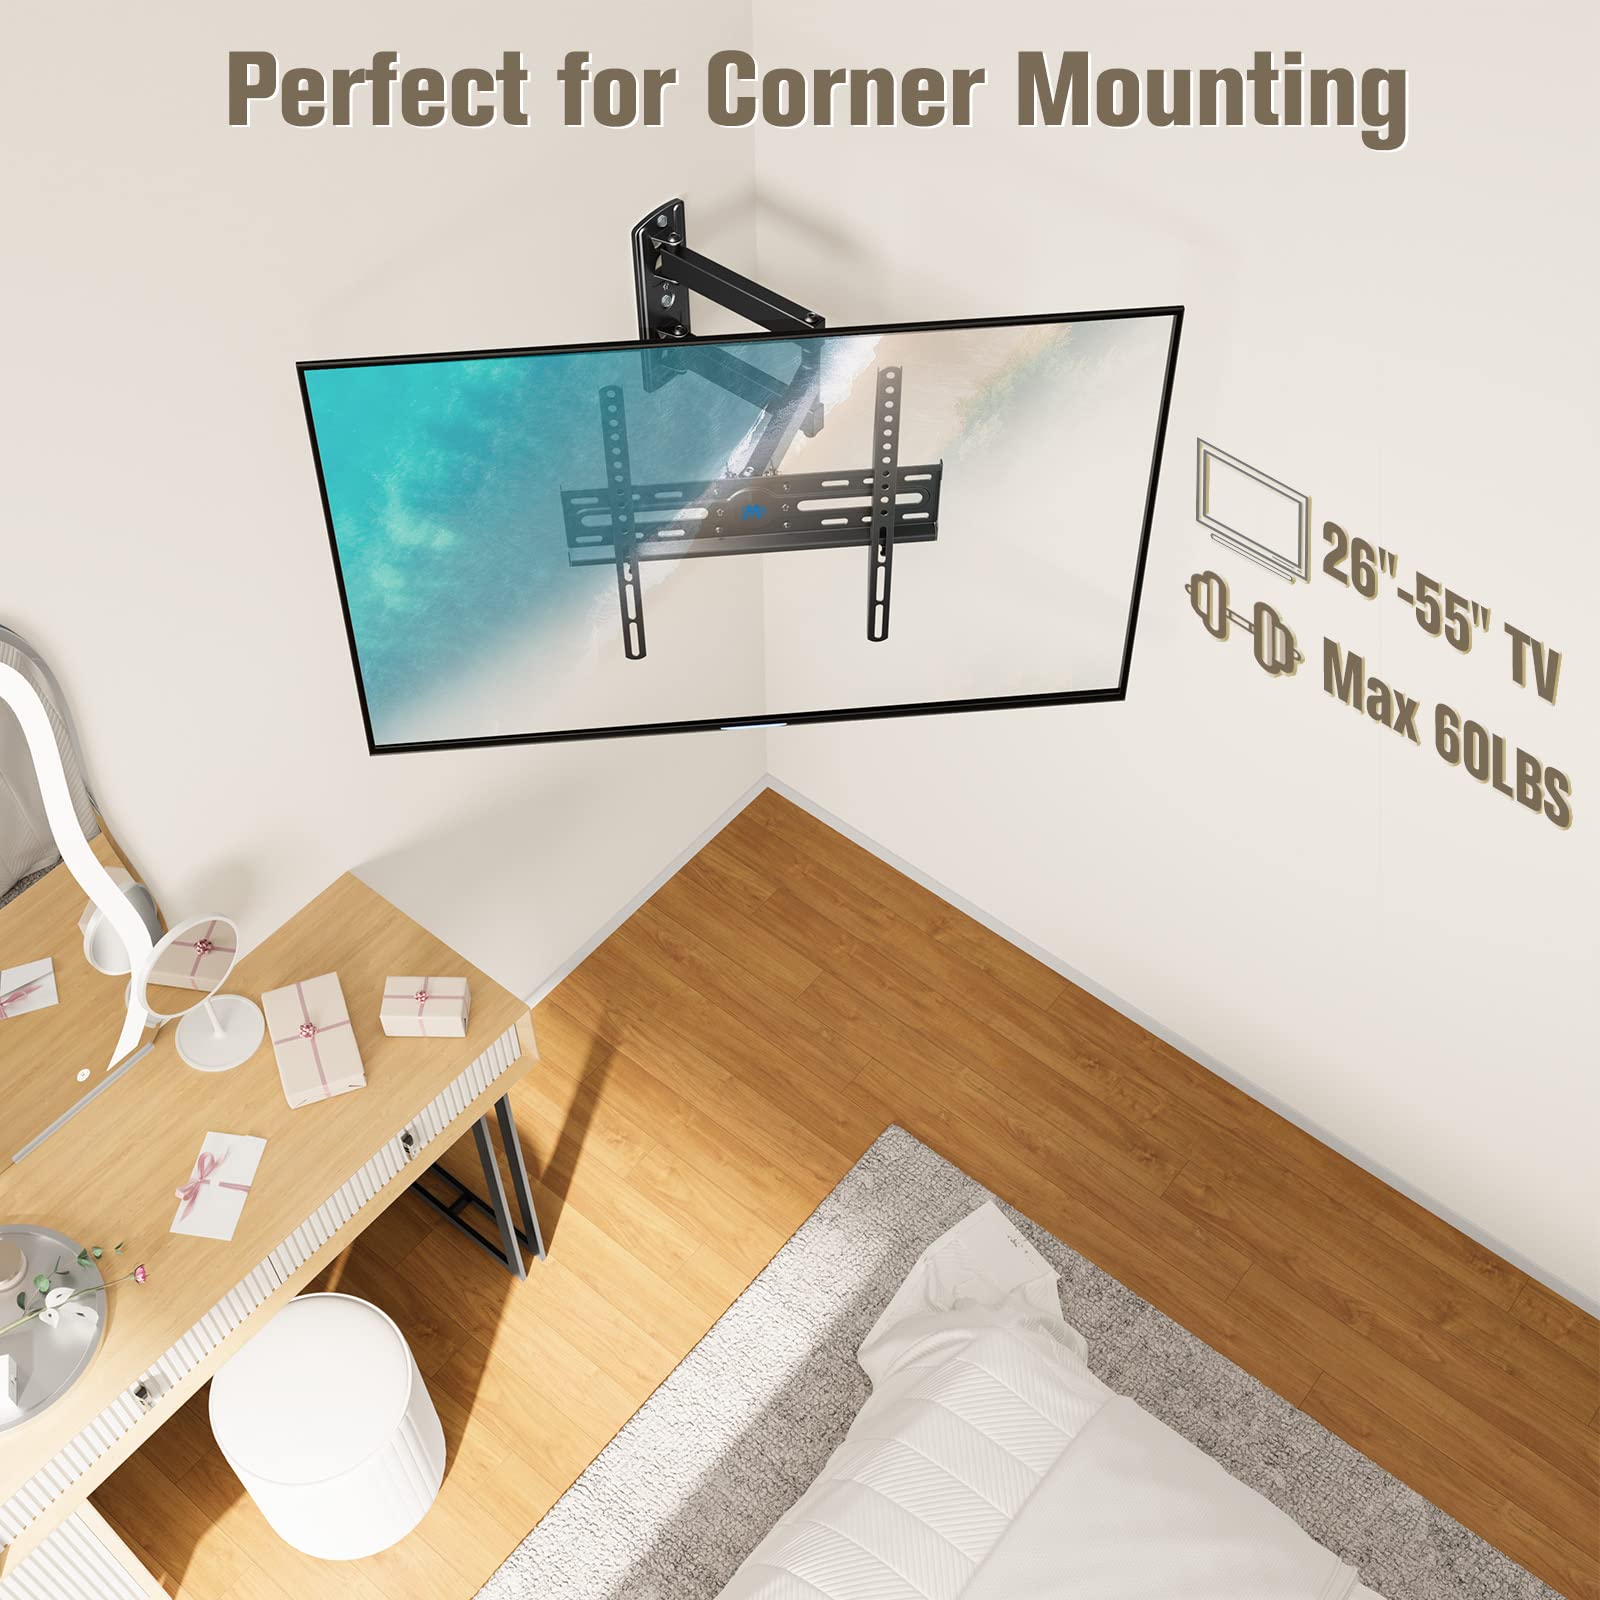 Mounting Dream TV Wall Mount Swivel and Tilt for Most 26-55 Inch TV, TV Mount Perfect Center Design, Full Motion TV Mount Bracket with Articulation, up to VESA 400x400mm, 60 lbs, MD2377